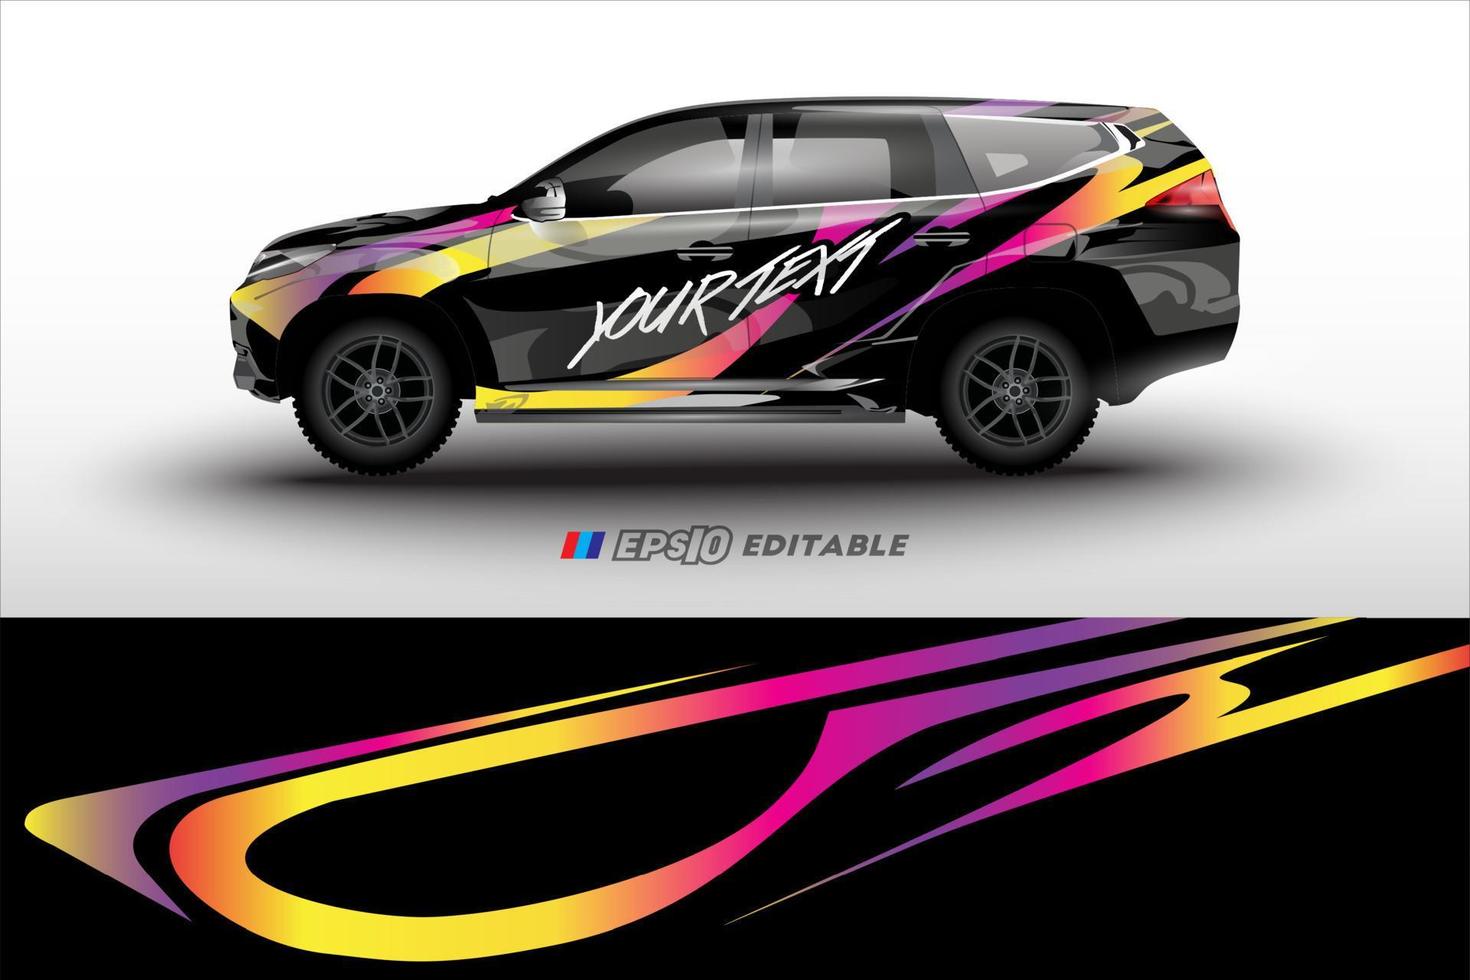 racing car wrap design for vehicle vinyl stickers and automotive company sticker livery vector